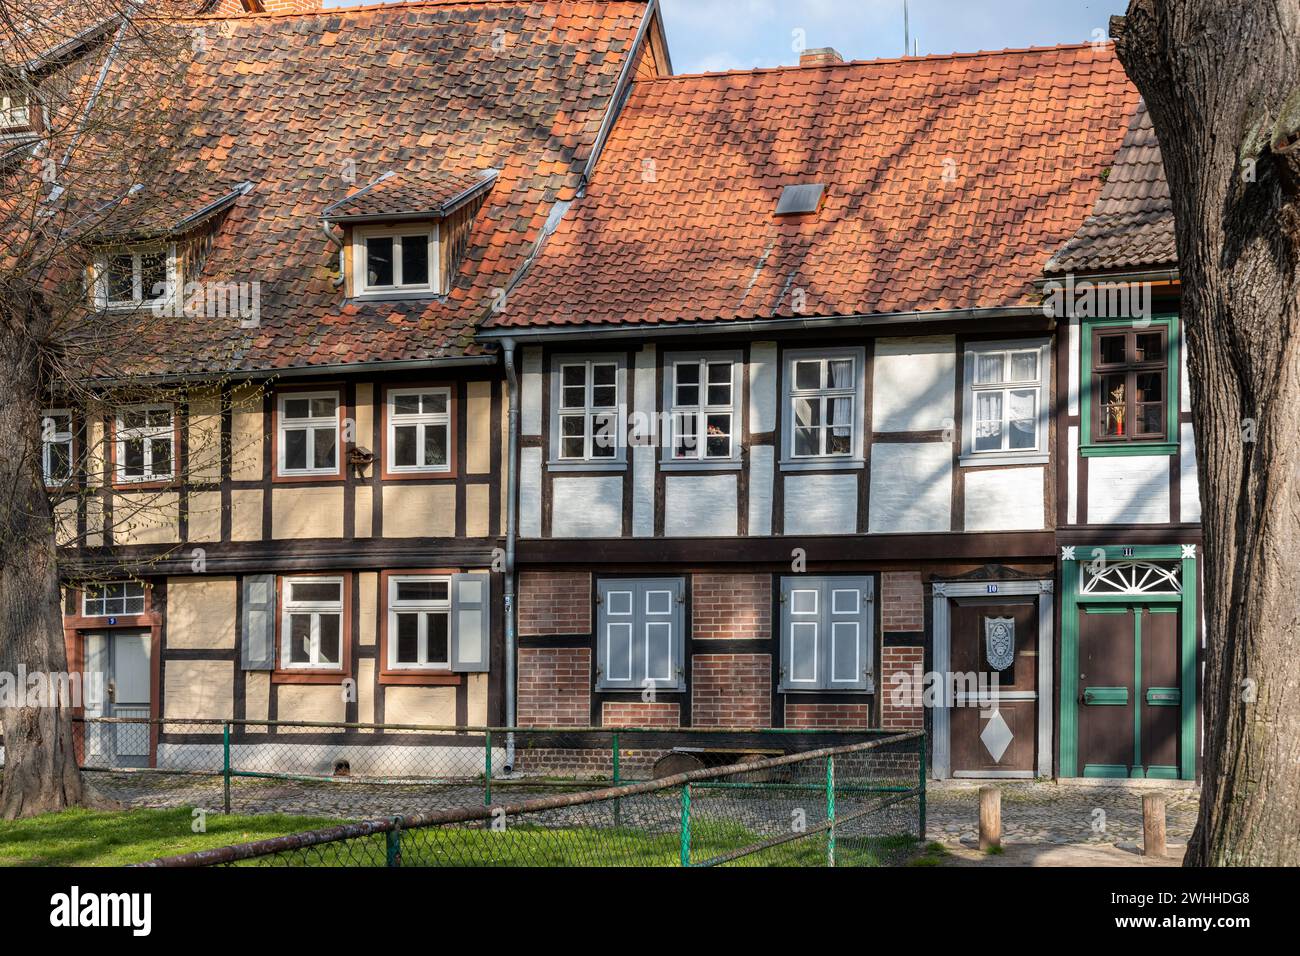 Pictures from Quedlinburg Harz historic old town Stock Photo